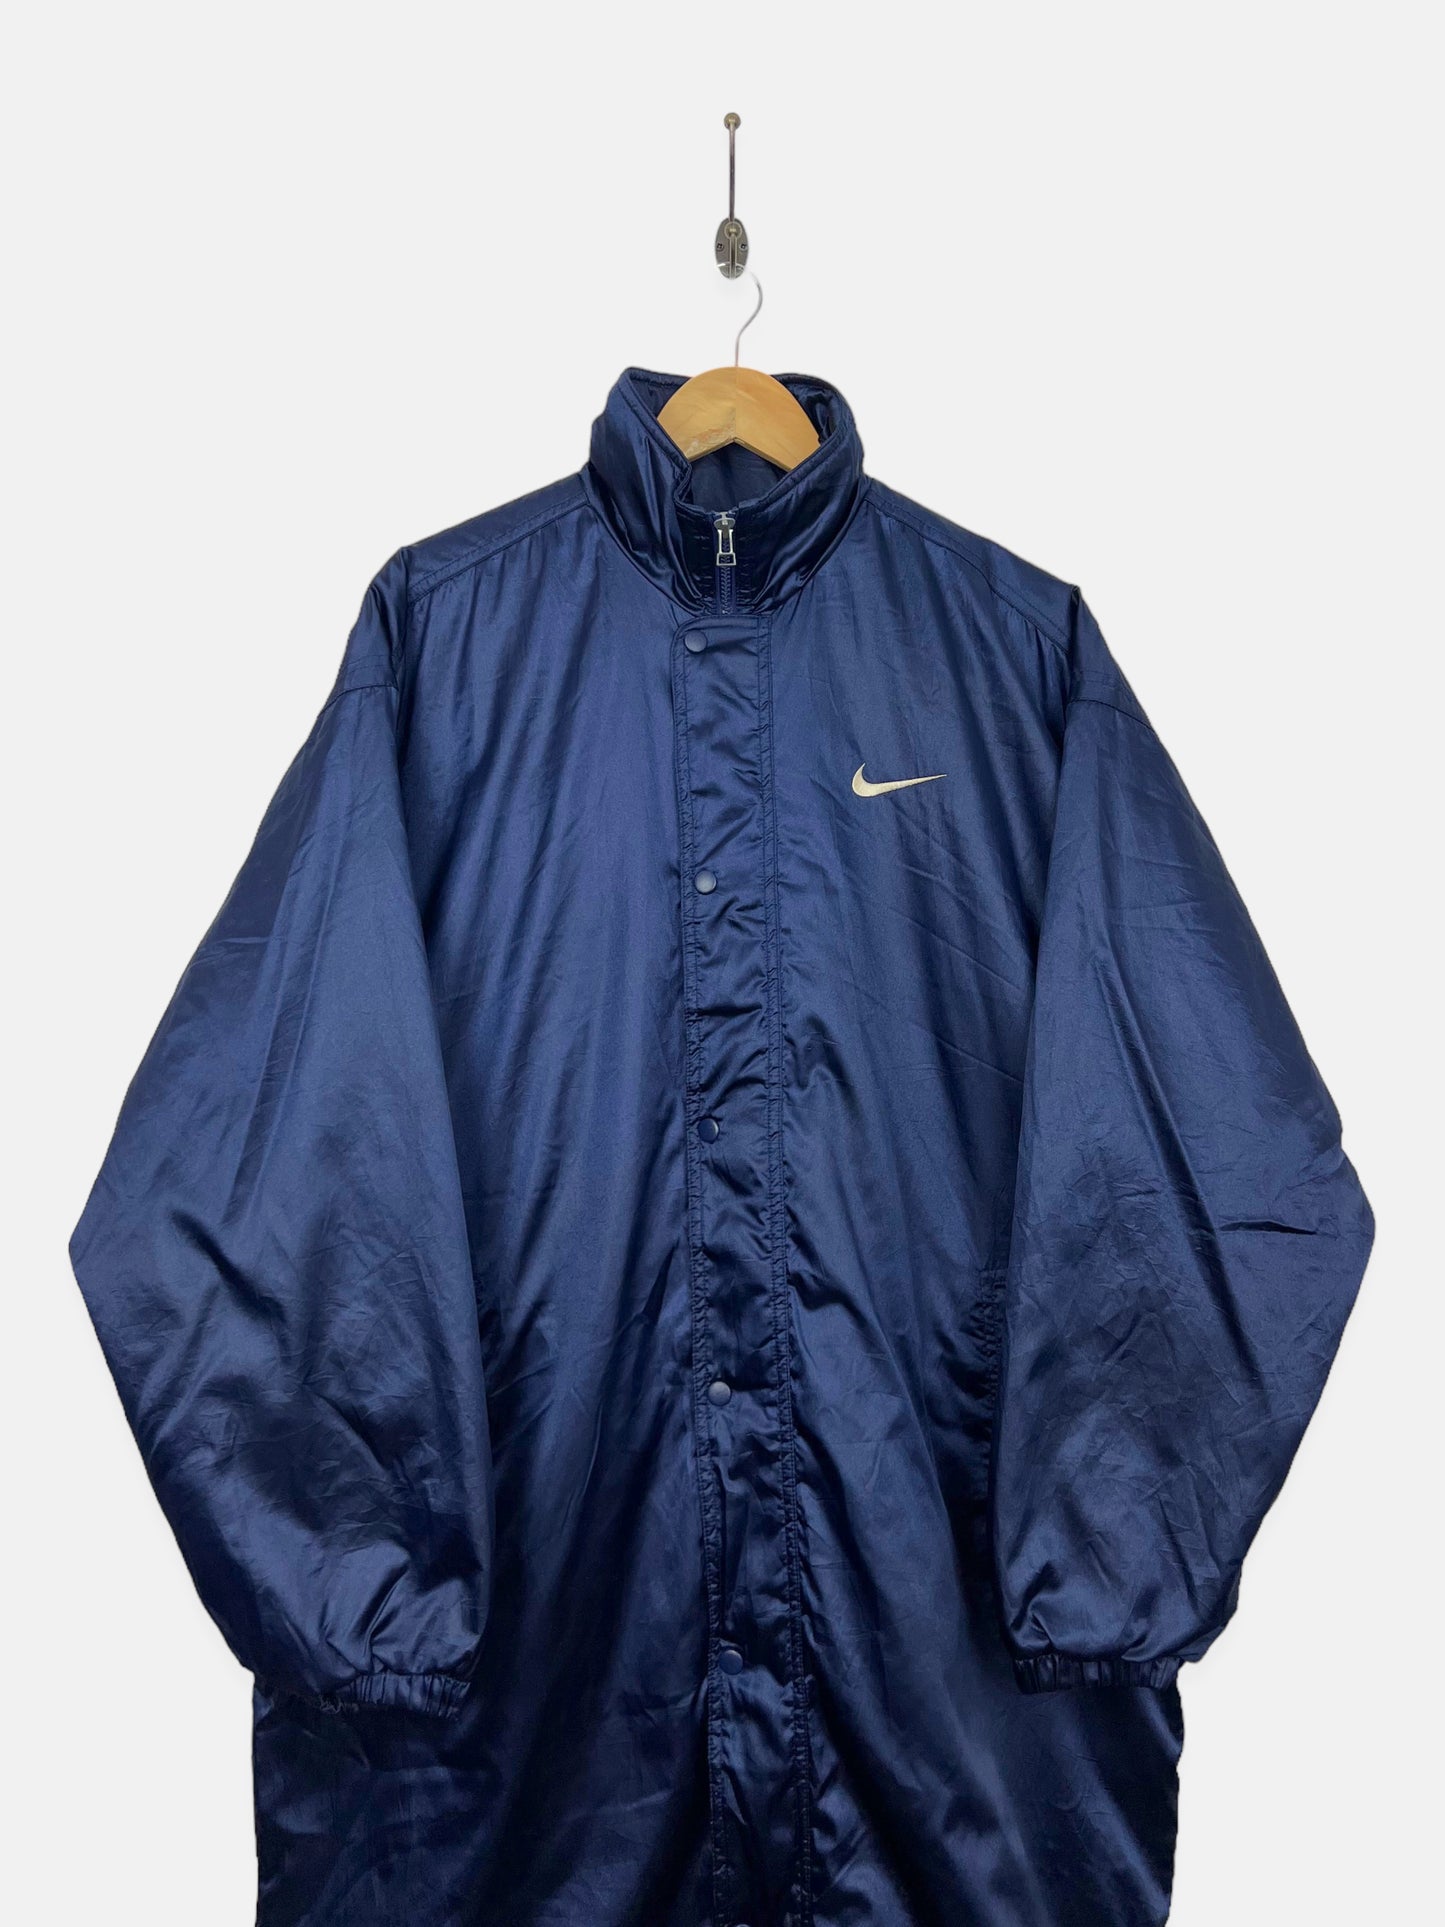 90's Nike Embroidered Vintage Trench Jacket Size XL